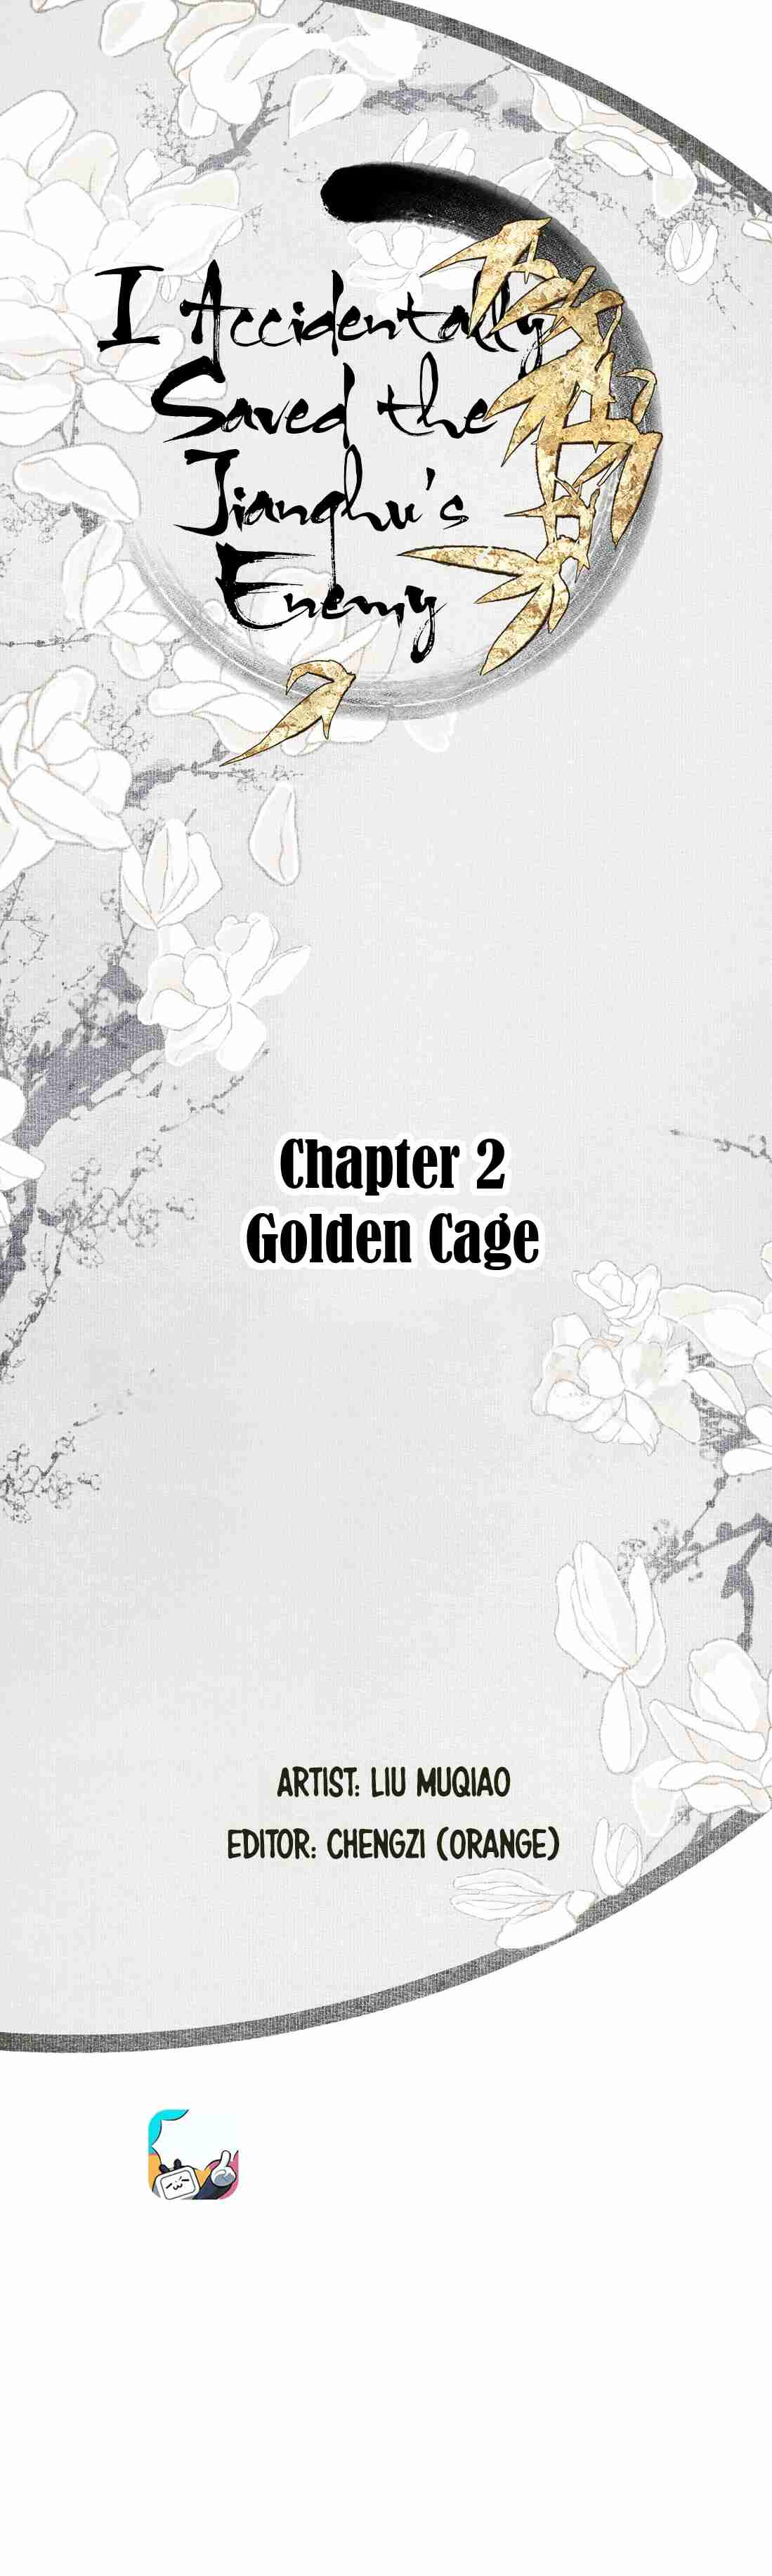 I Accidentally Saved the Jianghu's Enemy Ch. 2 Golden Cage